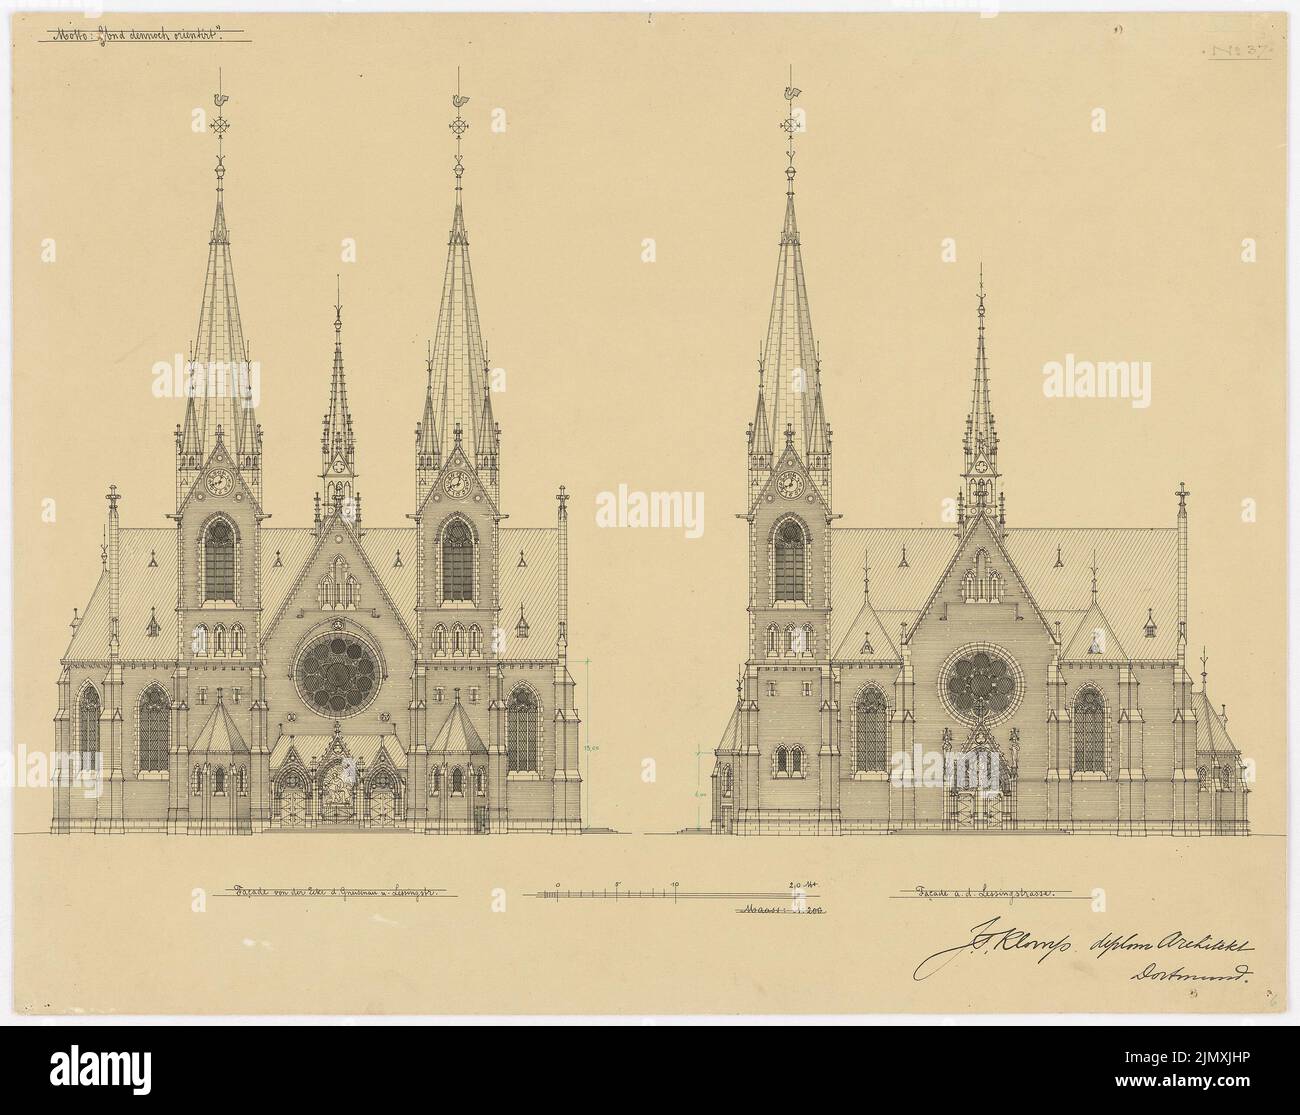 Klomp Johannes Franziskus (1865-1946), St. Aposteln Hafenkirche (with rectory), competition 'and yet oriented', Dortmund (1897-1897): front and side view of the church 1: 200. Ink on cardboard, 43 x 54.4 cm (including scan edges) Stock Photo